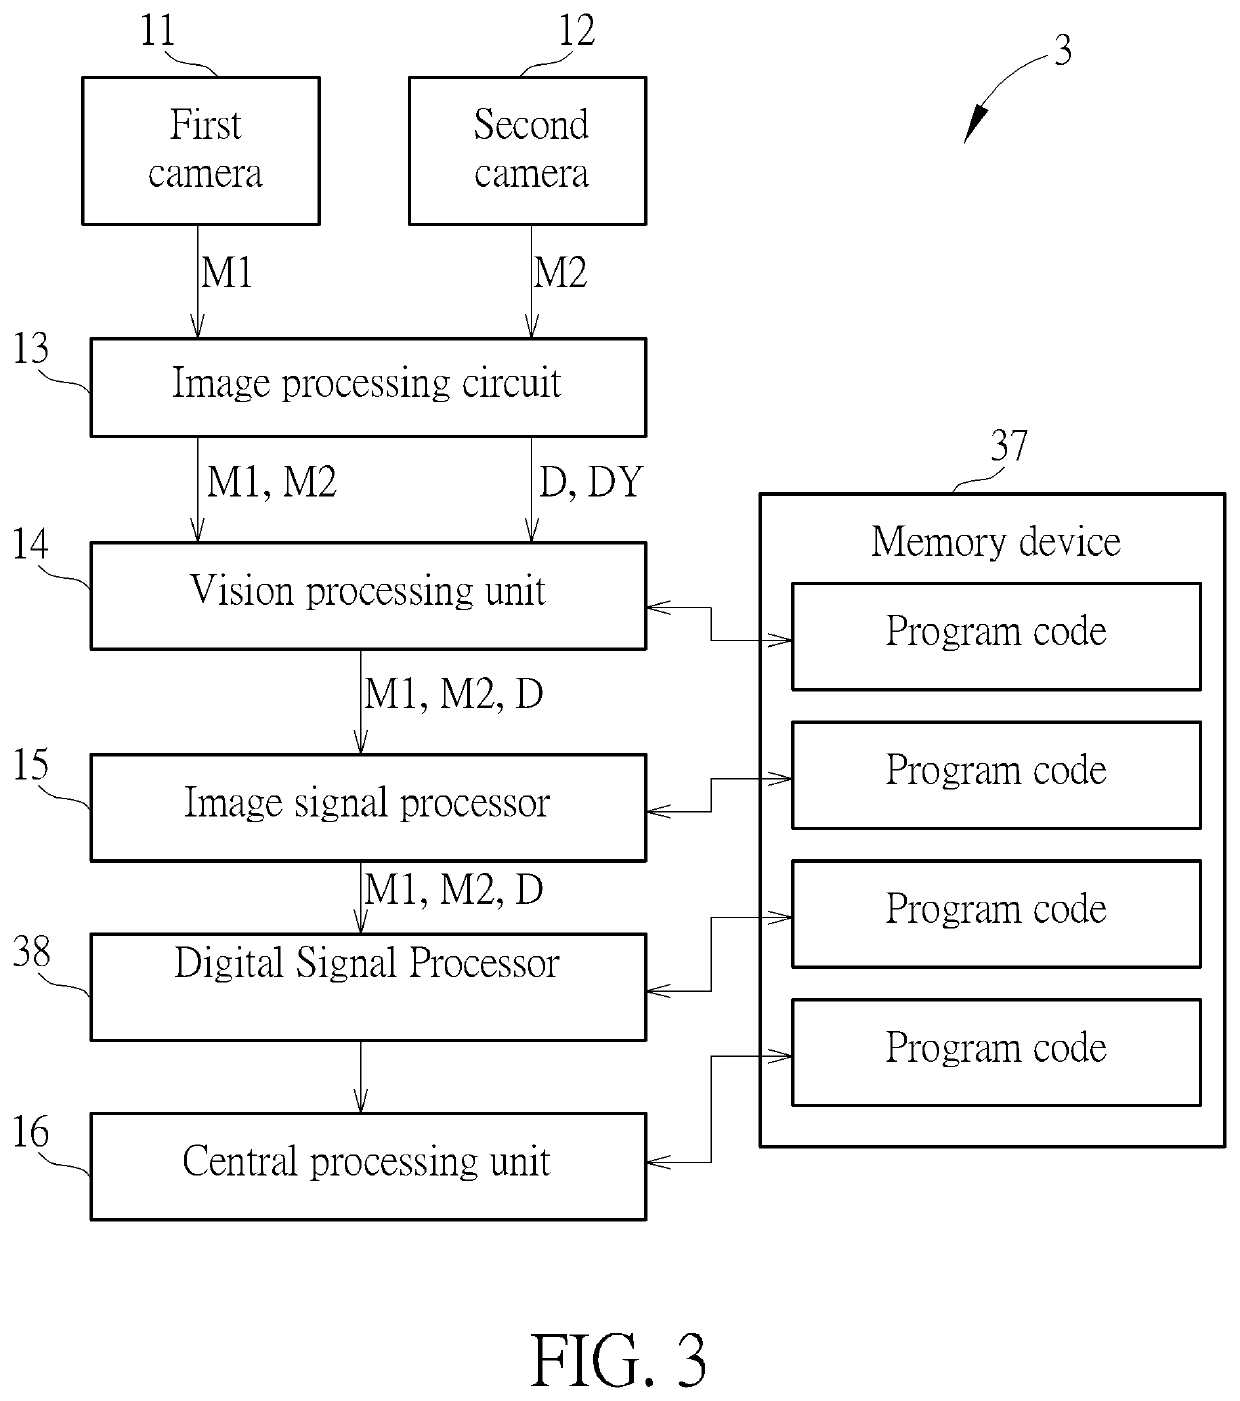 Method, apparatus, and non-transitory computer-readable medium for interactive image processing using depth engine and digital signal processor